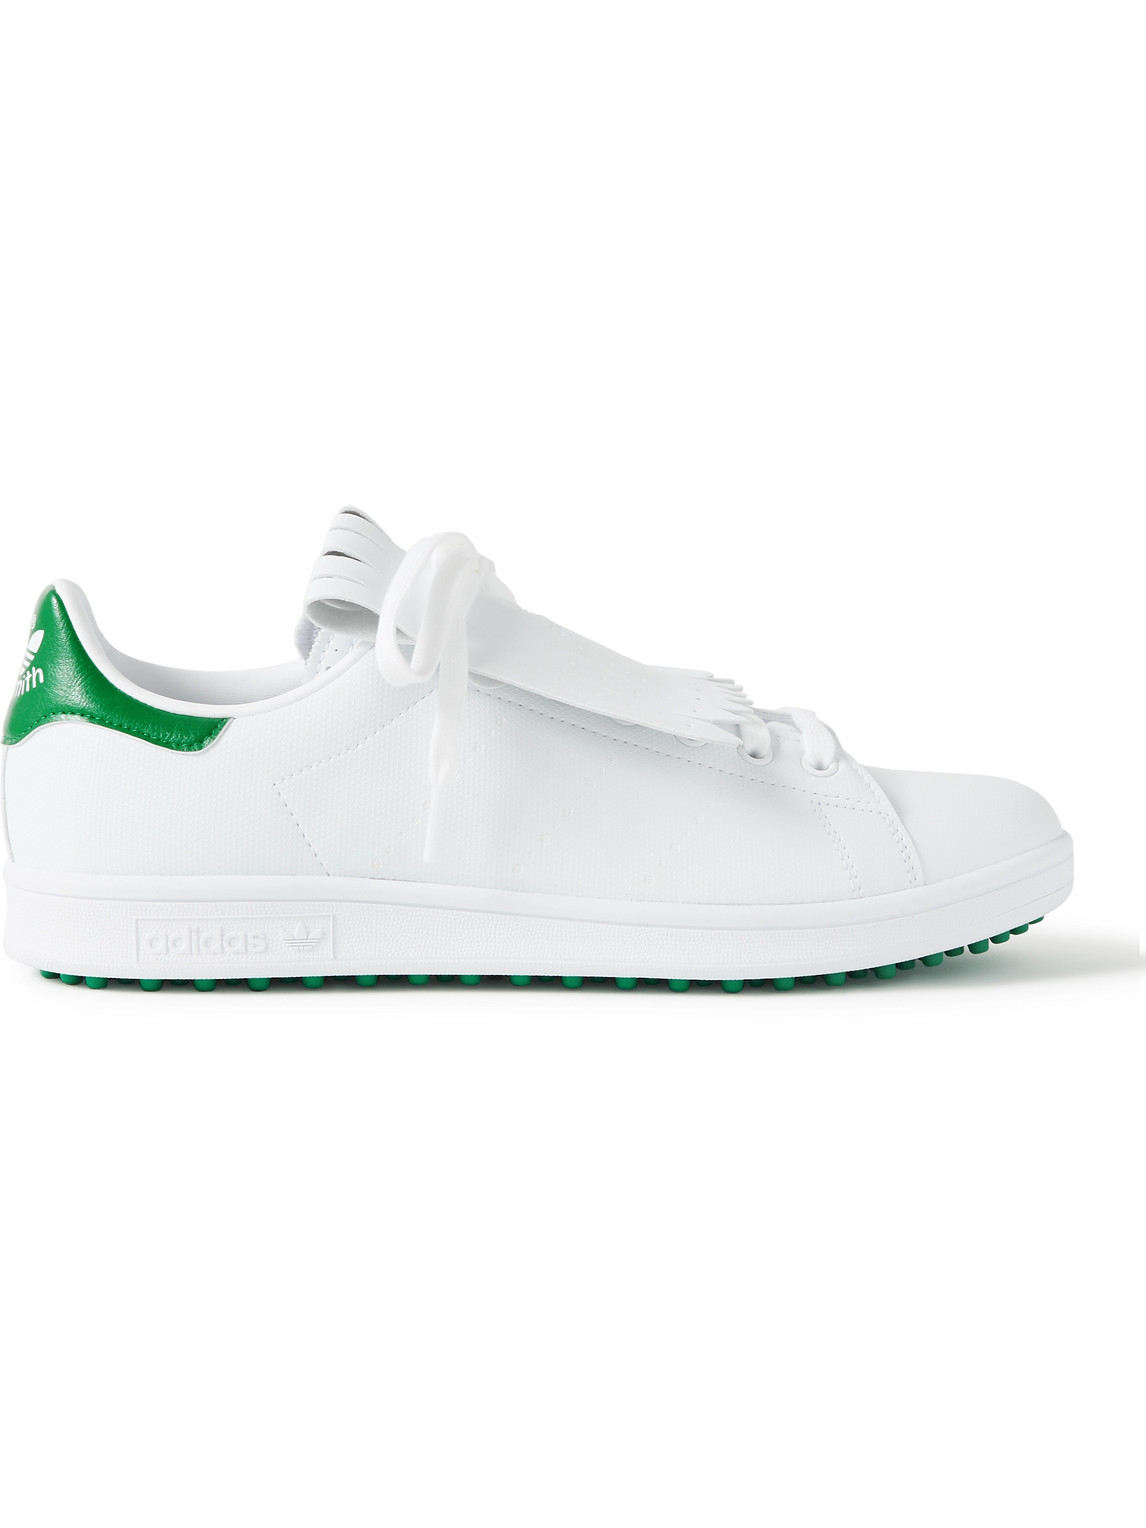 Adidas Golf Stan Smith Special Edition Primegreen And Faux Leather Spikeless Golf Shoes In White